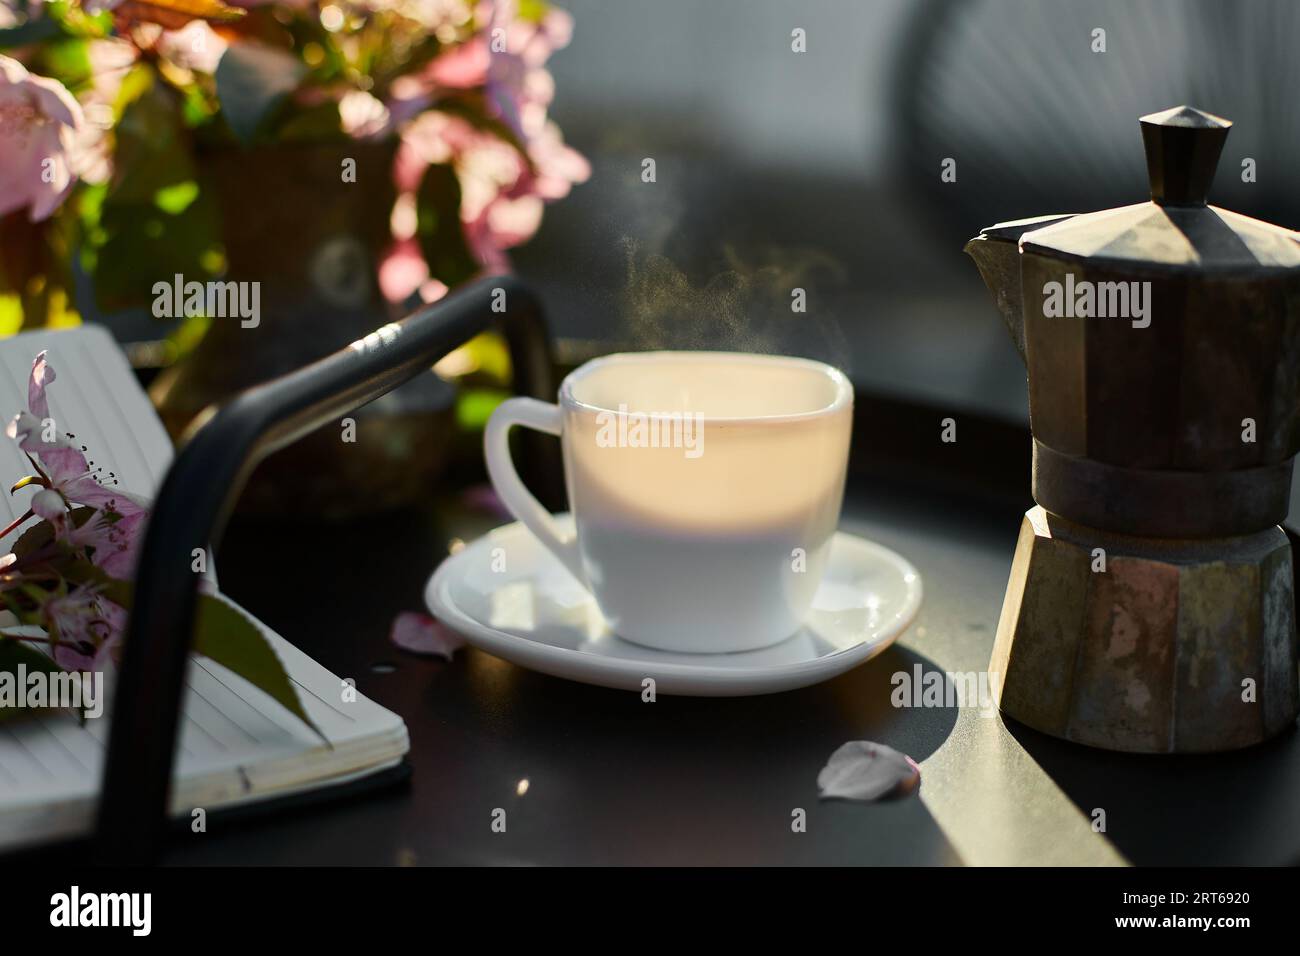 https://c8.alamy.com/comp/2RT6920/cup-of-coffee-with-steam-flowers-and-notebook-on-the-small-black-table-on-terrace-at-home-in-a-sunny-day-outdoor-workspace-summer-relaxation-coffee-2RT6920.jpg